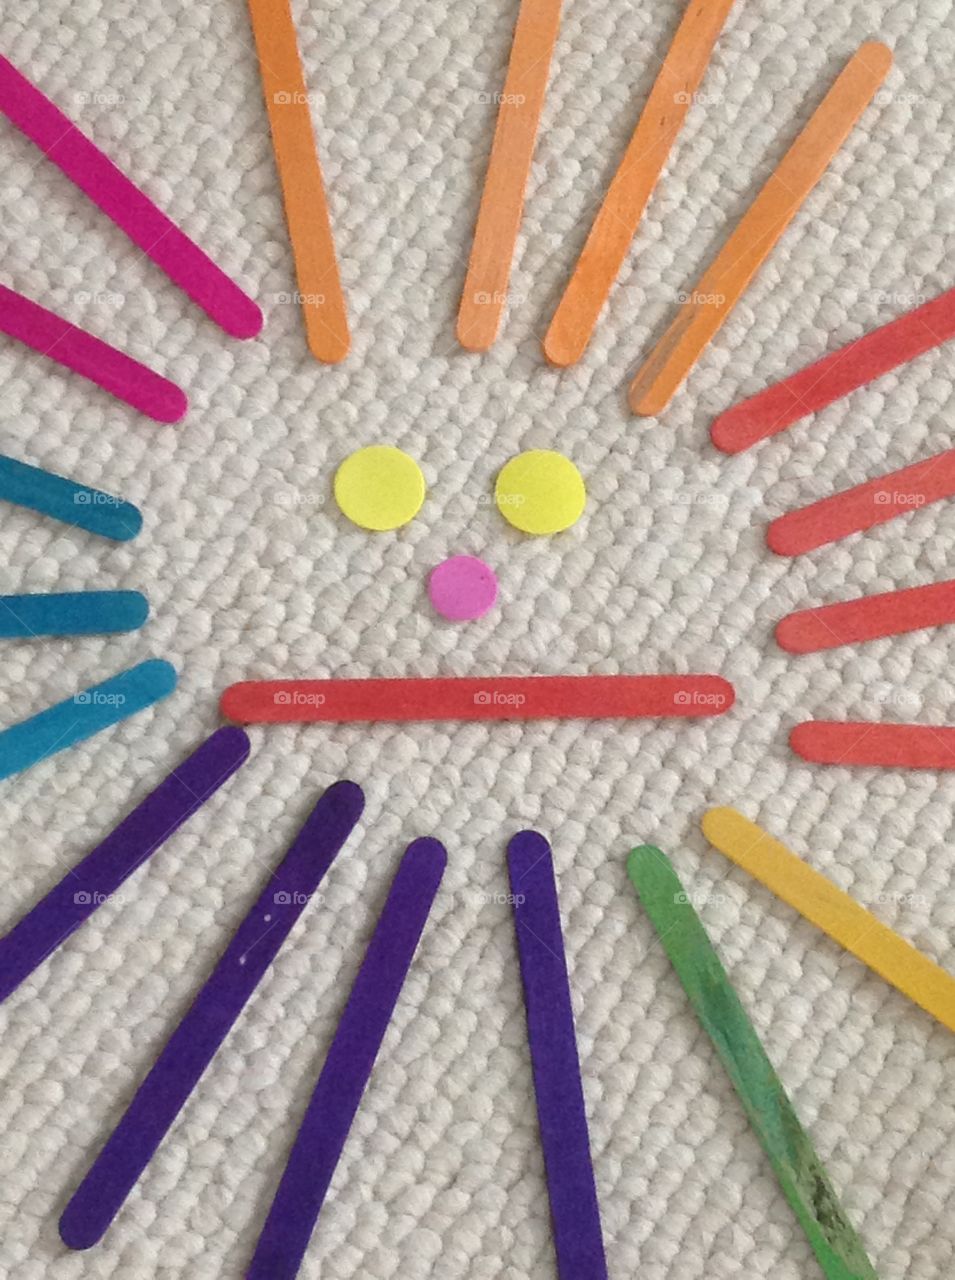 Popcicle sticks and circle stickers for arts and crafts supplies.